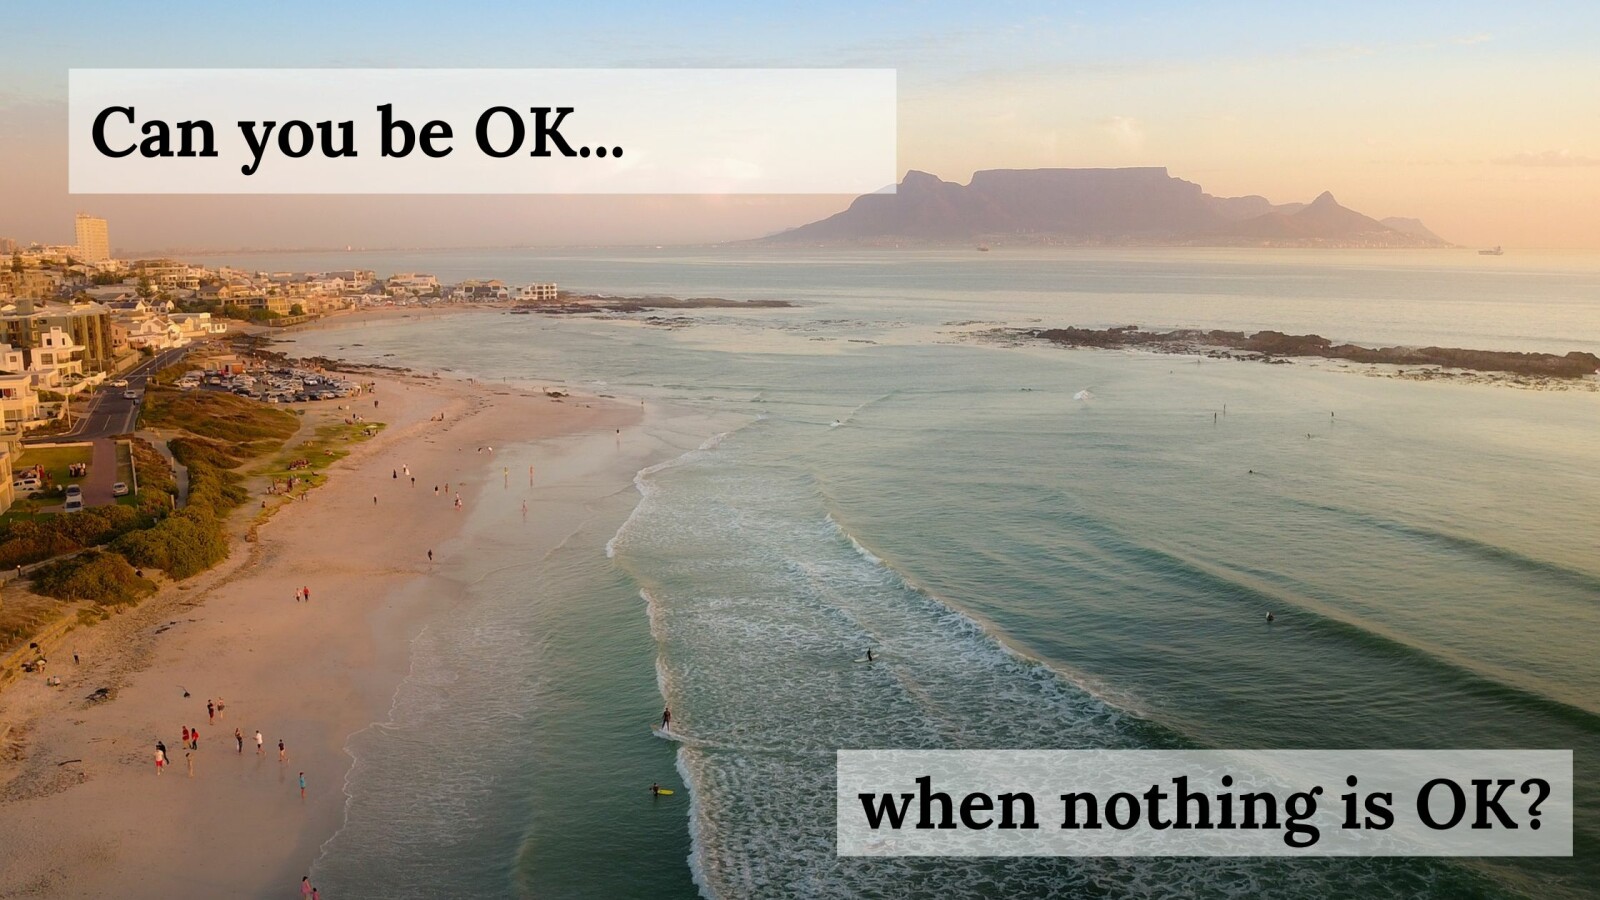 Can you be OK when nothing is OK?